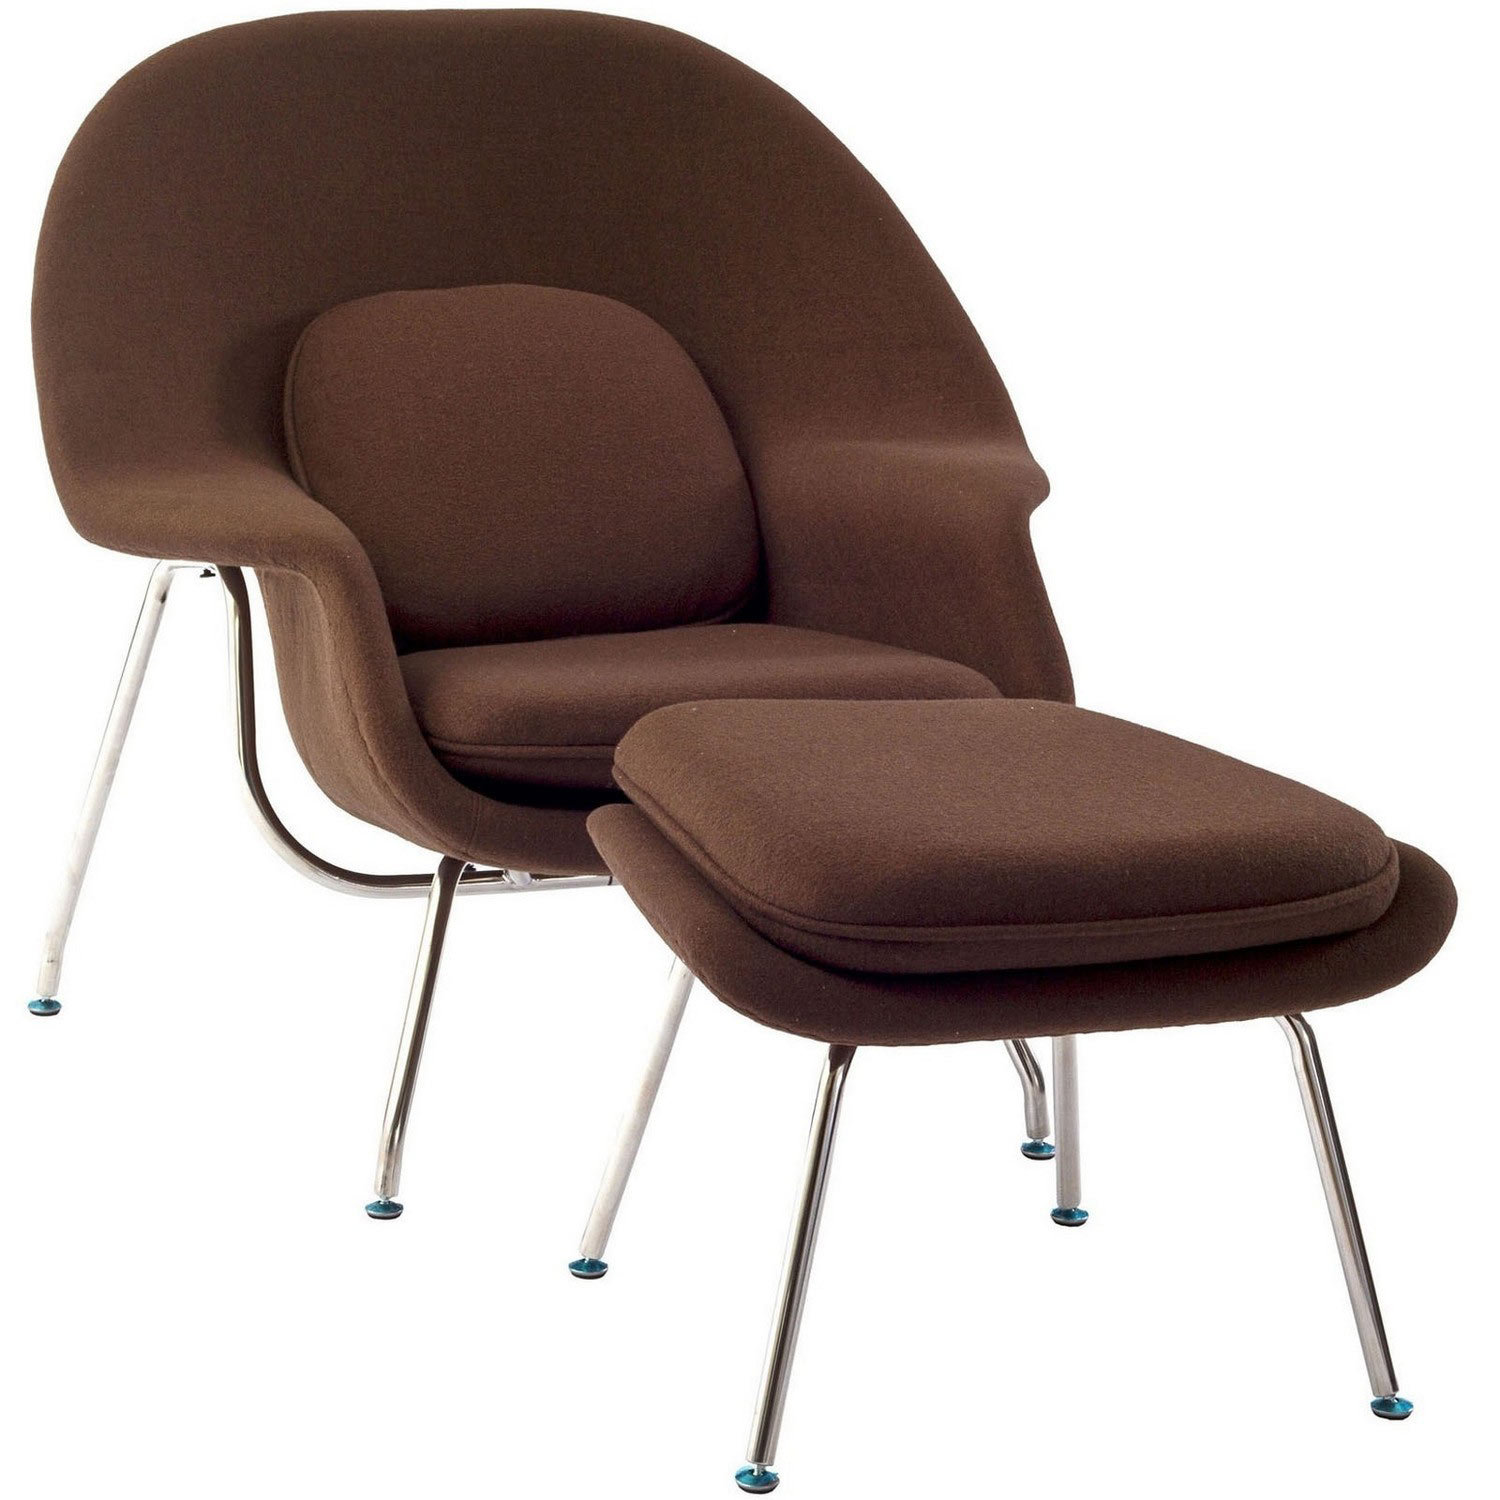 Modway W Fabric Lounge Chair - Brown